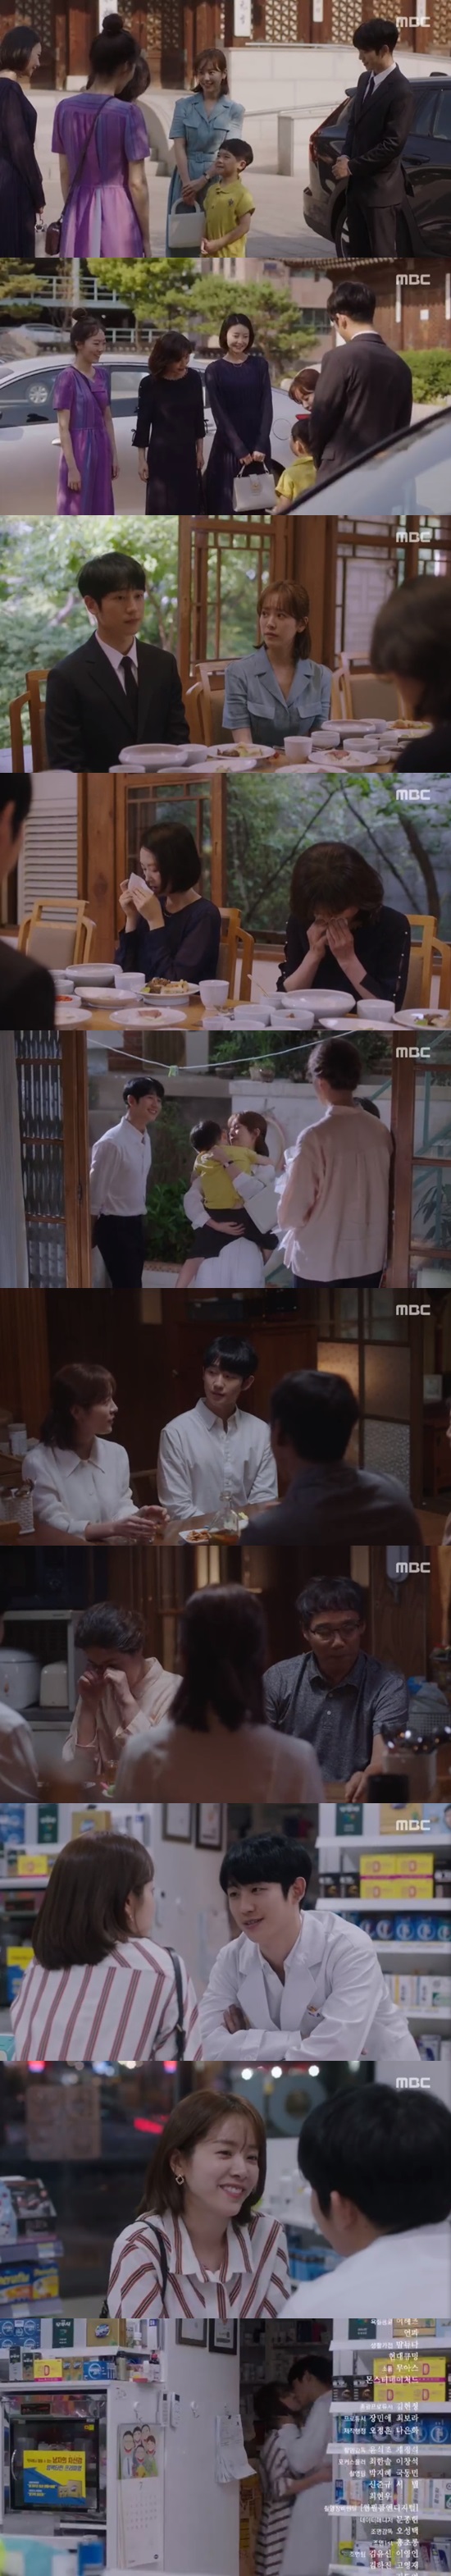 Han Ji-min and Jung Hae-in have been greeted by Happy Endings with the promise of marriage.In the MBC drama Spring Night 31-32 (the last episode/playplay by Kim Eun/director Ahn Pan-seok), which aired on July 11, Lee Jung-in (Han Ji-min) and Yoo Ji-Ho (Jeong Hae-in) promised to marry.Kwon Ki-seok (Kim Jun-han) insisted on marrying Lee Jung-in and made a place where his father, Kwon Young-guk (Kim Chang-wan), Lee Tae-hak (Song Seung-hwan), met.Kwon Young-guk, who already knows Lee Jung-ins mind, repeatedly asked, Will this marriage be? And Lee Tae-hak said, I am sorry for the stone.I should have taken a picture of it, he said, even fighting.Kwon Ki-seok helped Lee Tae-hak, who was drunk, to his home, and asked Shin Hyung-sun (Gil Hae-yeon) to marry Lee Jung-in again. Kwon Ki-seok said, Yoo Ji-Ho quality is bad.My father threatened me with a photo of him worried about my son.I asked for money, he said, and Shin Hyung-sun looked at Kwon Ki-seok and said he would meet Yoo Ji-Ho to his daughter Lee Jung-in.Lee Jung-in received a memorandum on condition that he could not marry if he drank again to Yoo Ji-Ho, and went to the house of Sister Seo-yool Lee (Lim Sung-eon), and later he was surprised to learn that the real reason for the divorce of Seo-yool Lee and Nam Si-hoon (Lee Moo-hyun) was domestic violence.Lee Jae-in (Ju-min-kyung), a seo-young Lee, hugged her and wept.Yoo Ji-Ho took his son Jung Eun-woo (Hi-an) to meet with the new model, and Seo-yool Lee asked for advice as a child care experience.Jung Eun-woo believes me, but it cant collapse. So can Jung In.I have only believed in one person, but I have to protect it no matter what. Lee Jung-in said, My women cry well. Father has a long way to go, said Shin, while Lee Jung-in said, Father will wait as long as possible. There may be moments of regret in the future, but I am fine.Ive got Jiho next to me, and Ill be happy again as I pour it all over and get comforted.When Yoo Ji-Ho said, I will do well, Lee Jung-in said, No, we will do well.Nam Sihoon, as requested by Seo-young Lee, stamped the divorce documents and drank a days drink, and met Kwon Ki-seok, and then the two knew each others real condition.Nam Si-hoon said he was divorceing Seo-young Lee, and Kwon Ki-seok said Lee Jung-in had a man separately.When Lee Tae-hak refused to propose his father, Kwon Ki-seok, to the director, he sent a letter to Lee Jung-in saying, Im sorry.Yoo Gyeong-sang